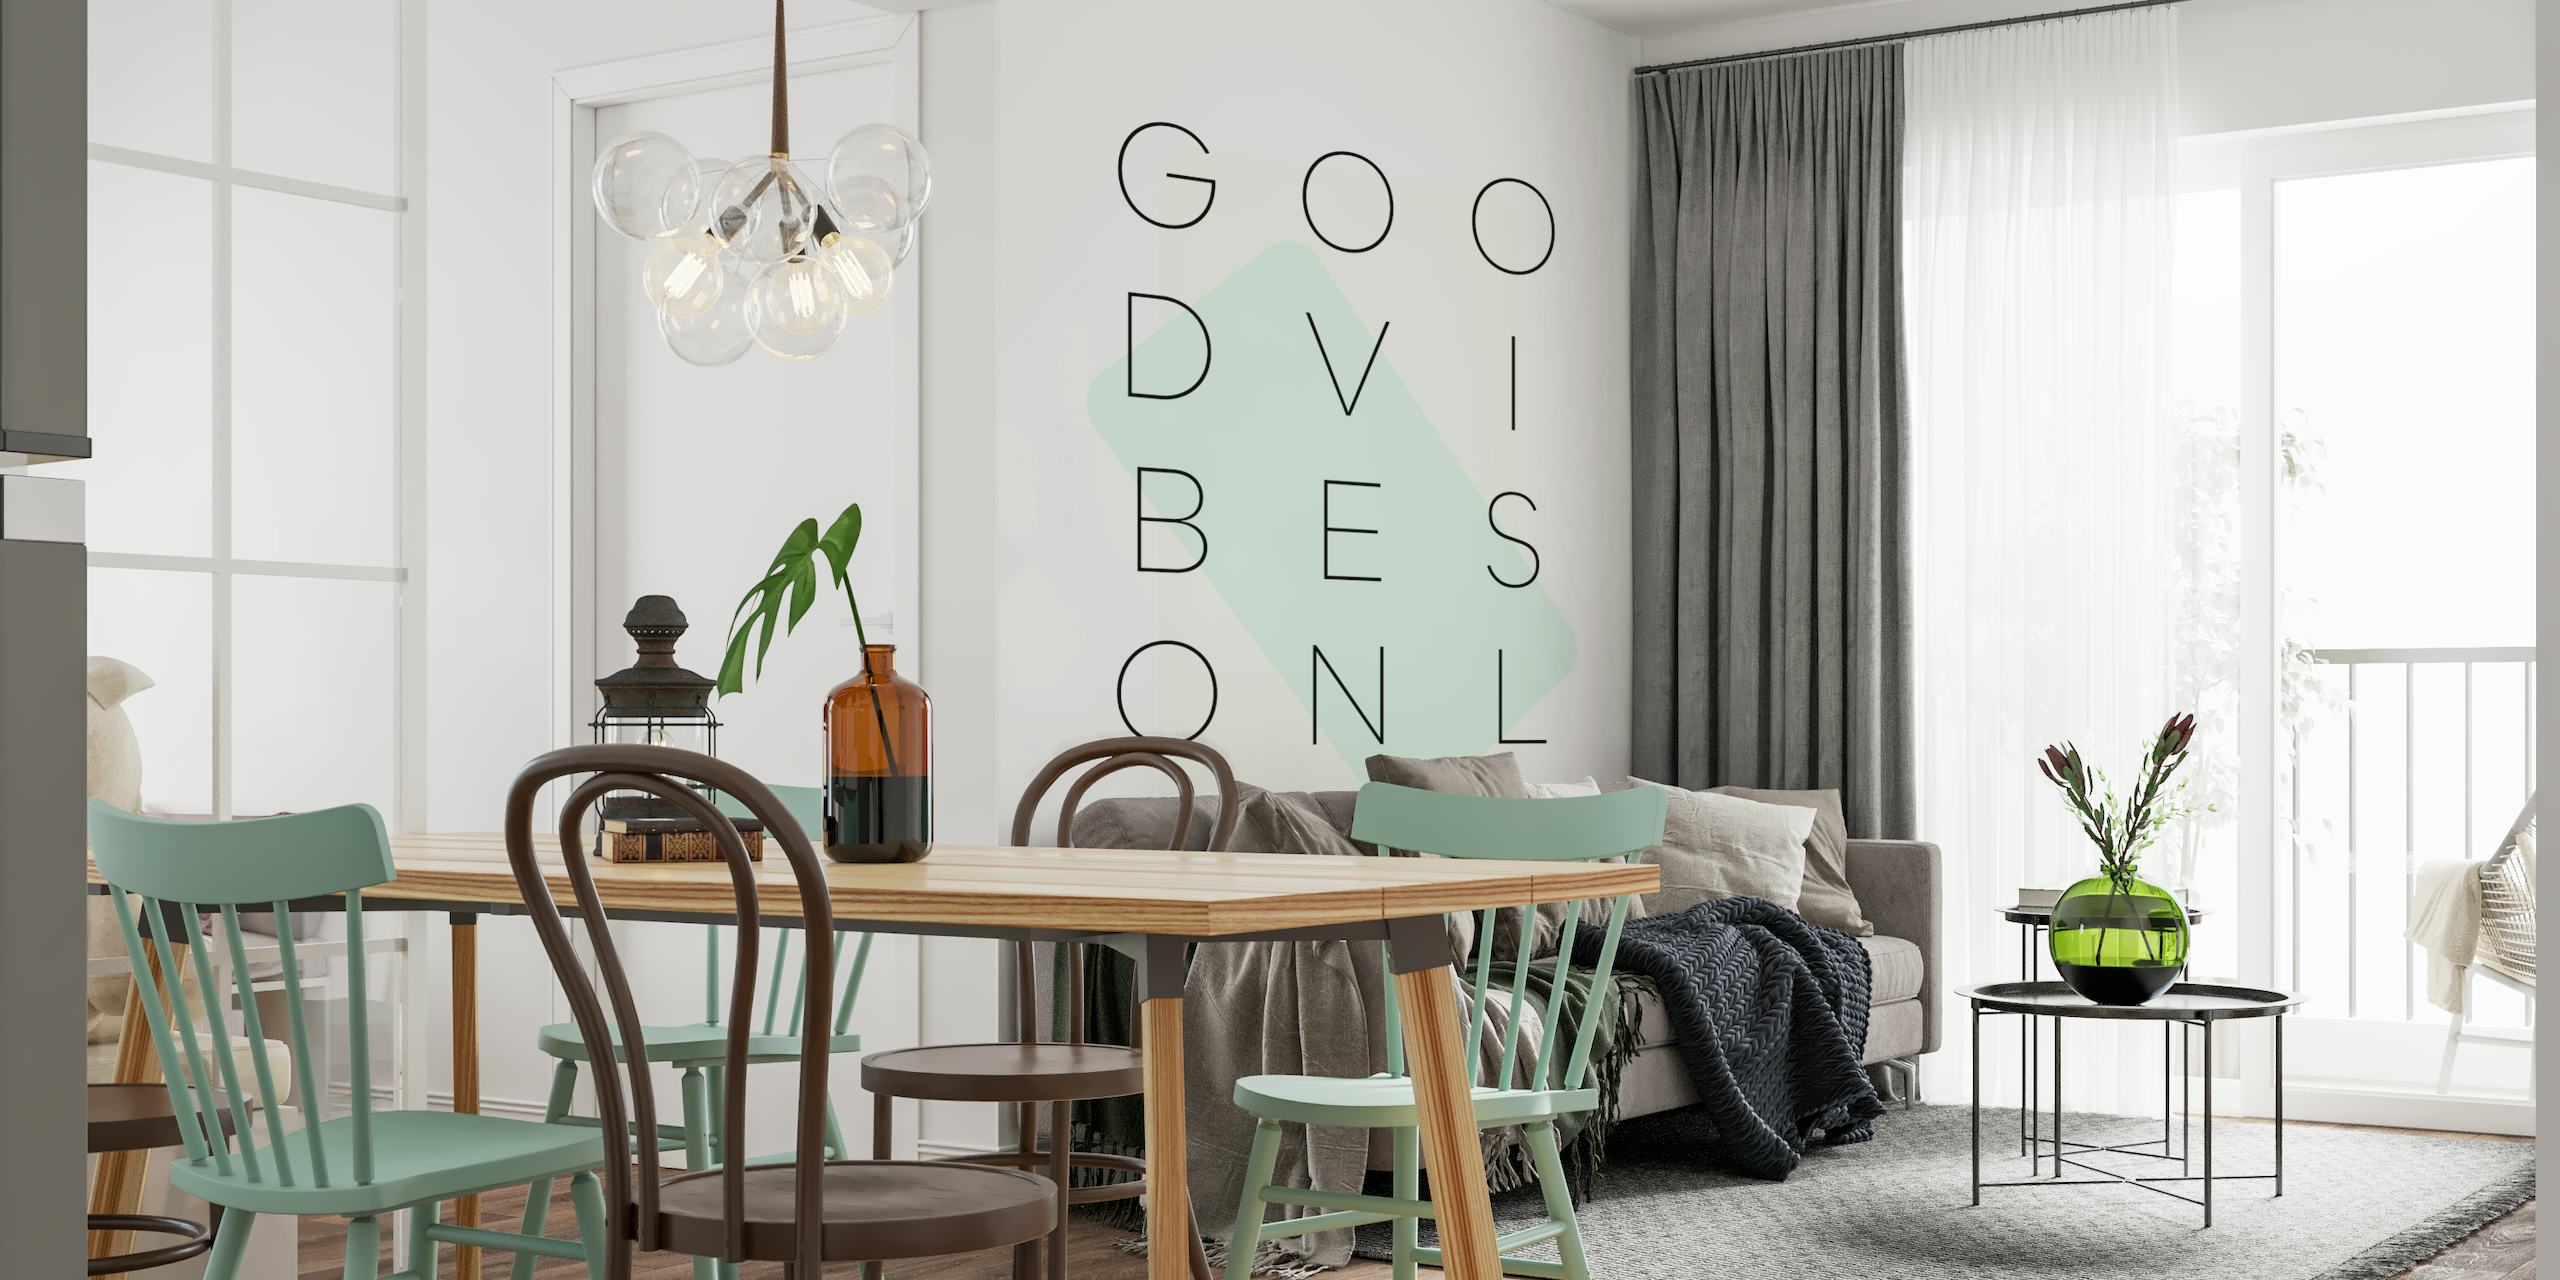 Good vibes only - turquoise behang